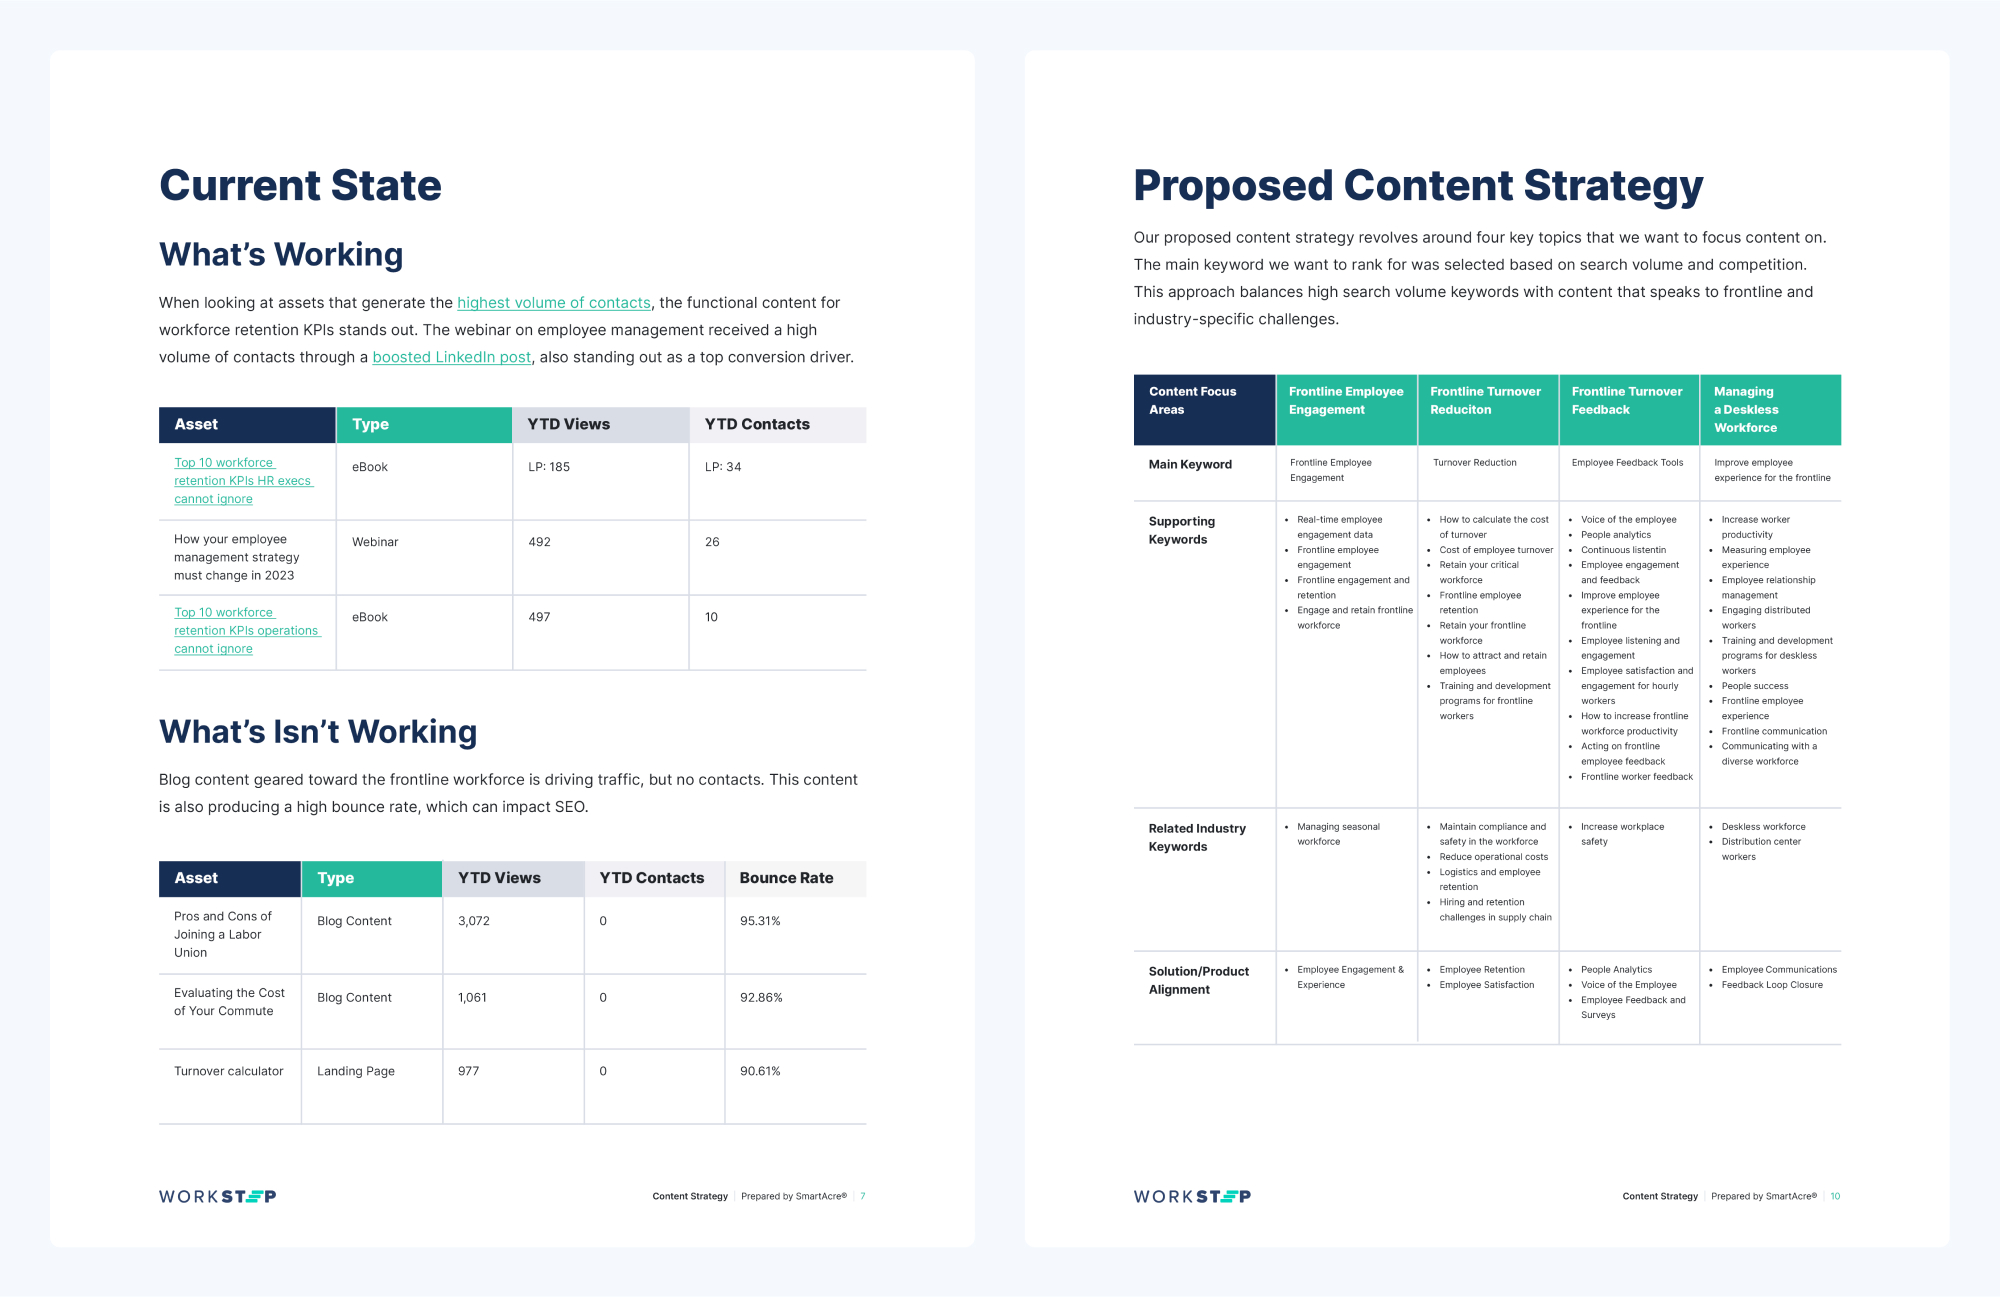 WorkStep content strategy ebook designs